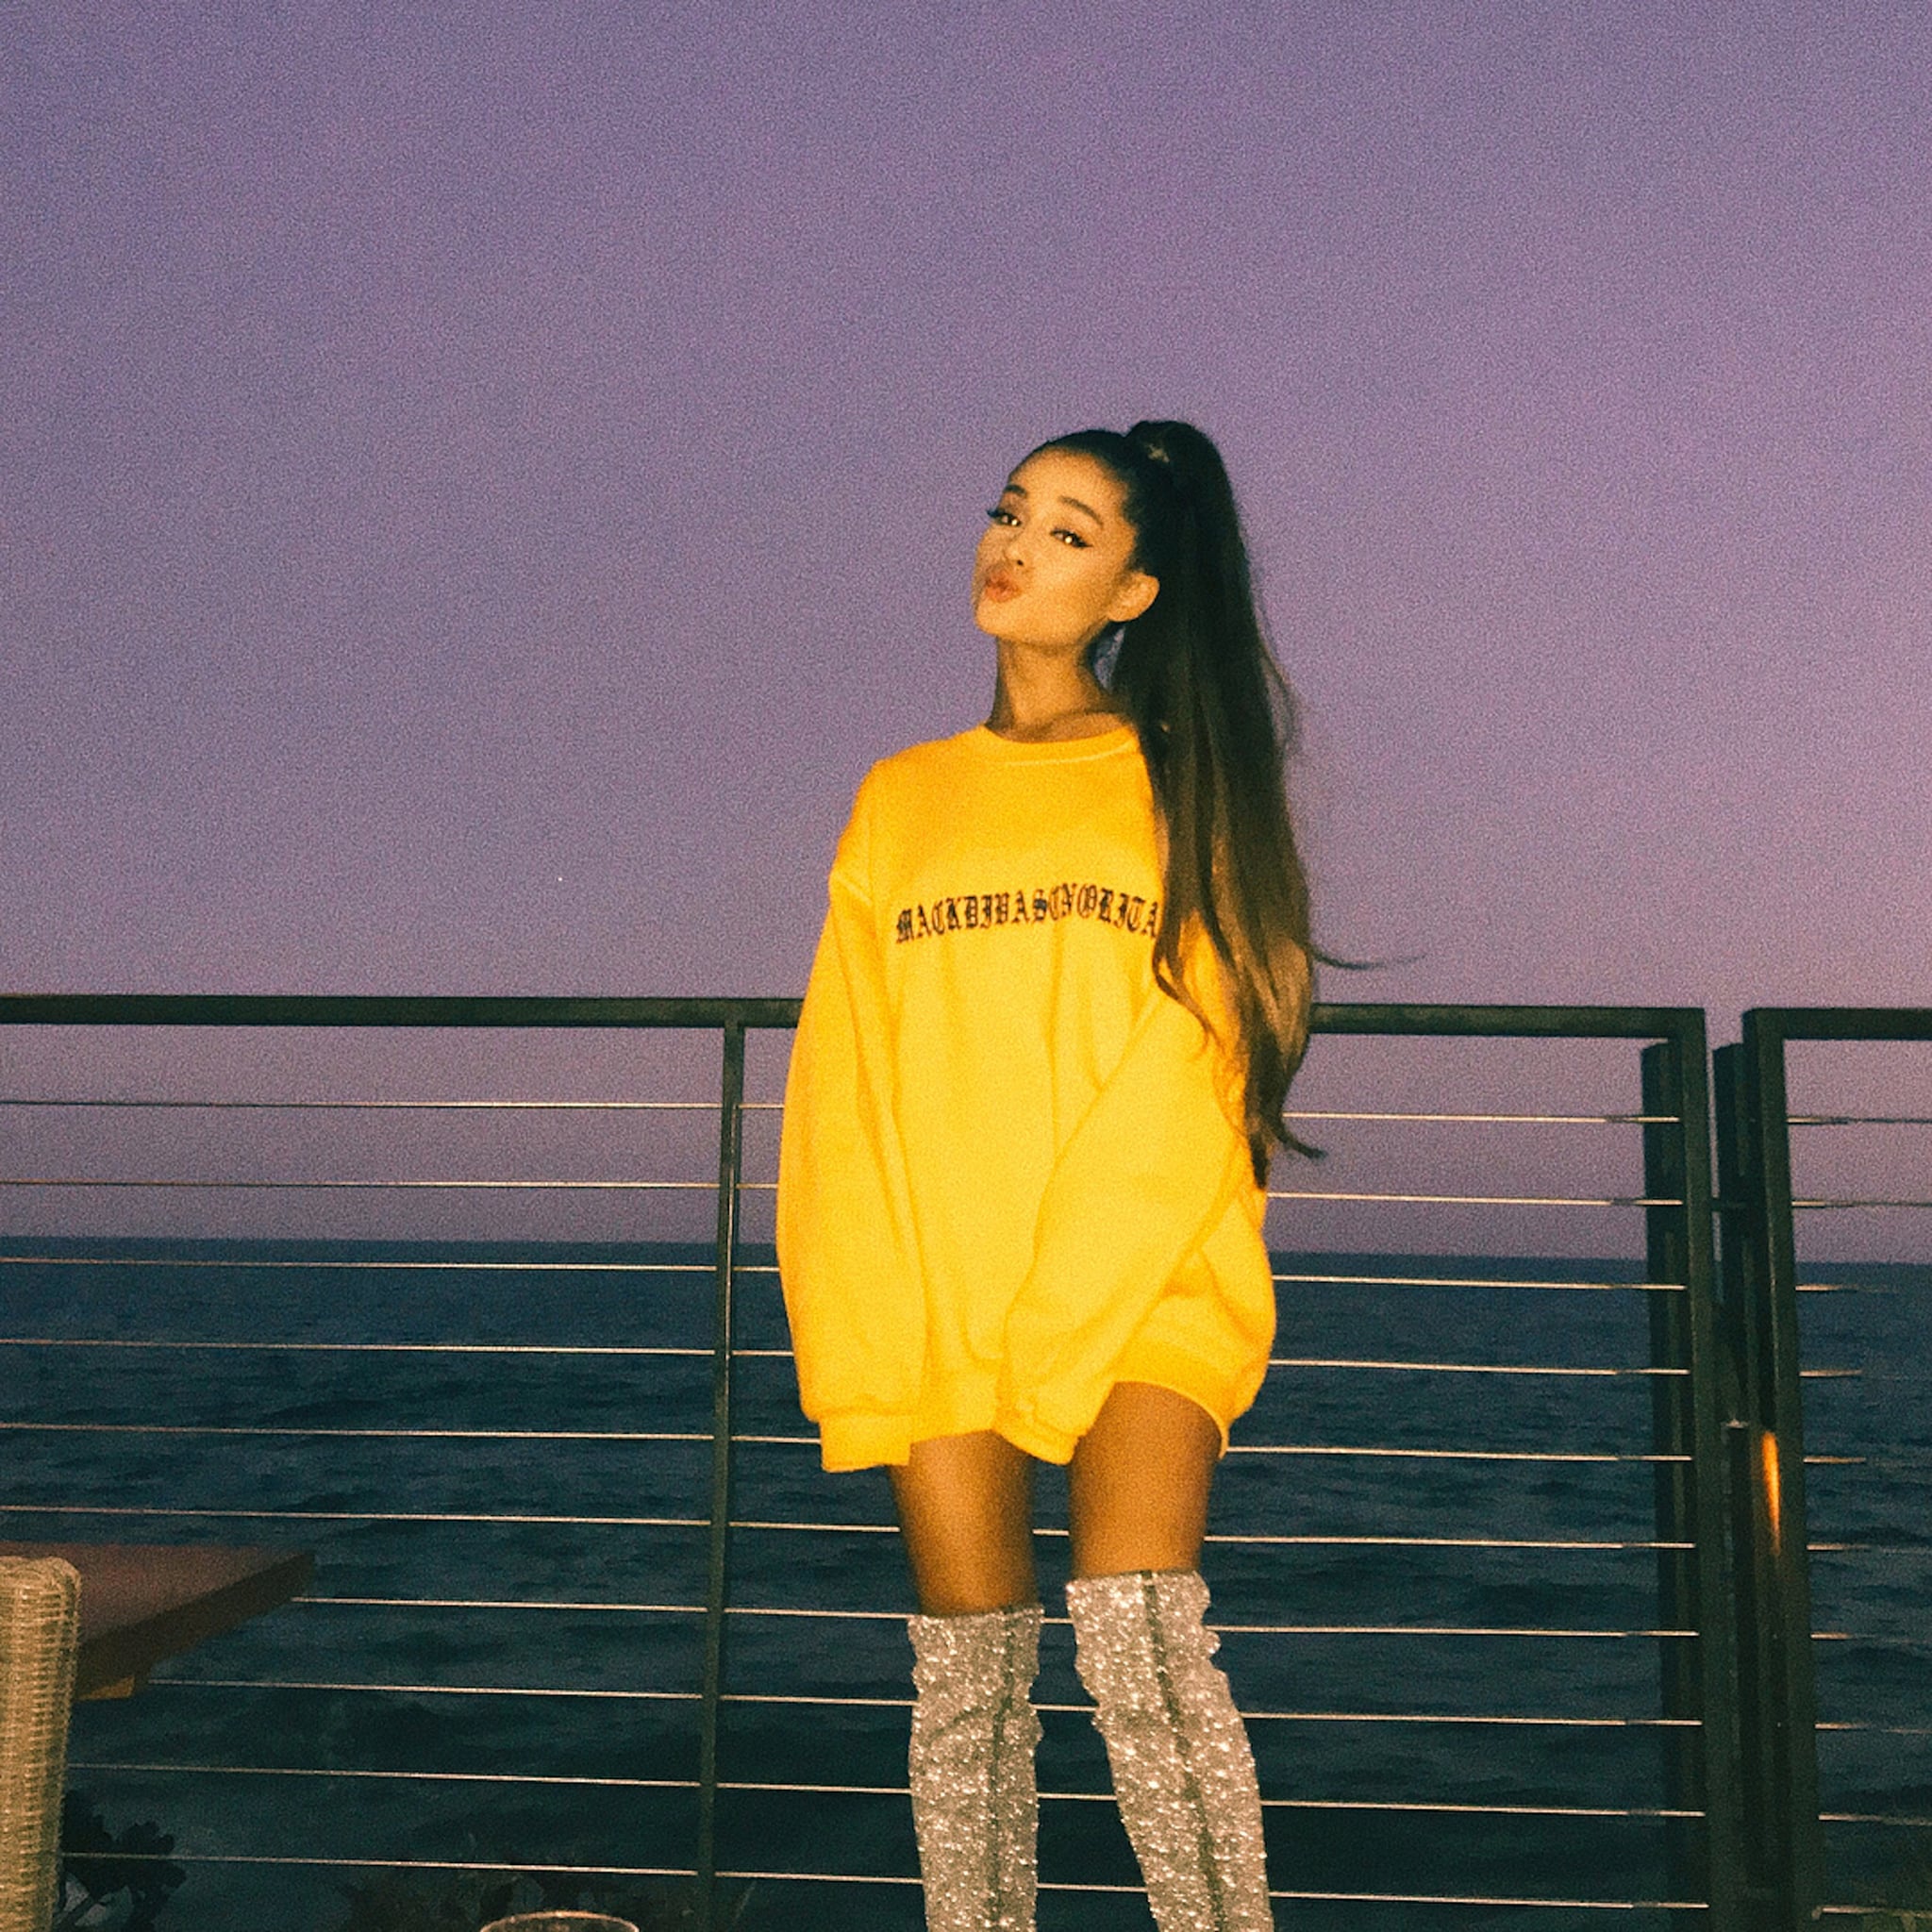 ariana grande sweater dress and boots